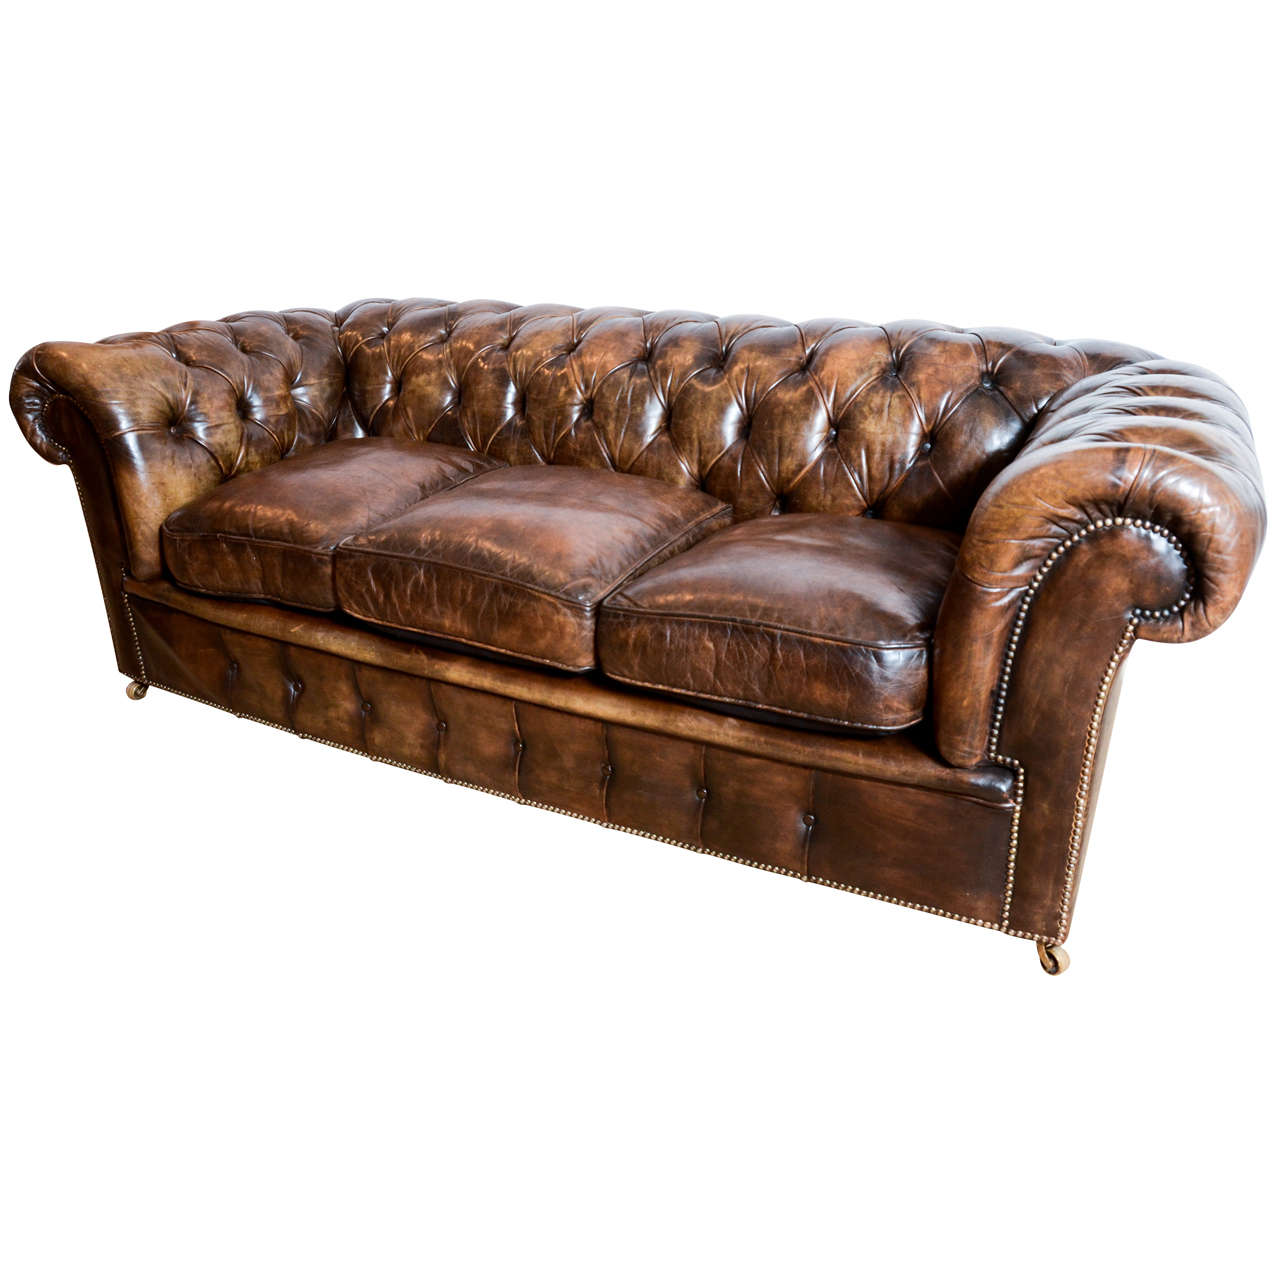 1920s English Upholstered Leather Chesterfield Sofa At 1stdibs